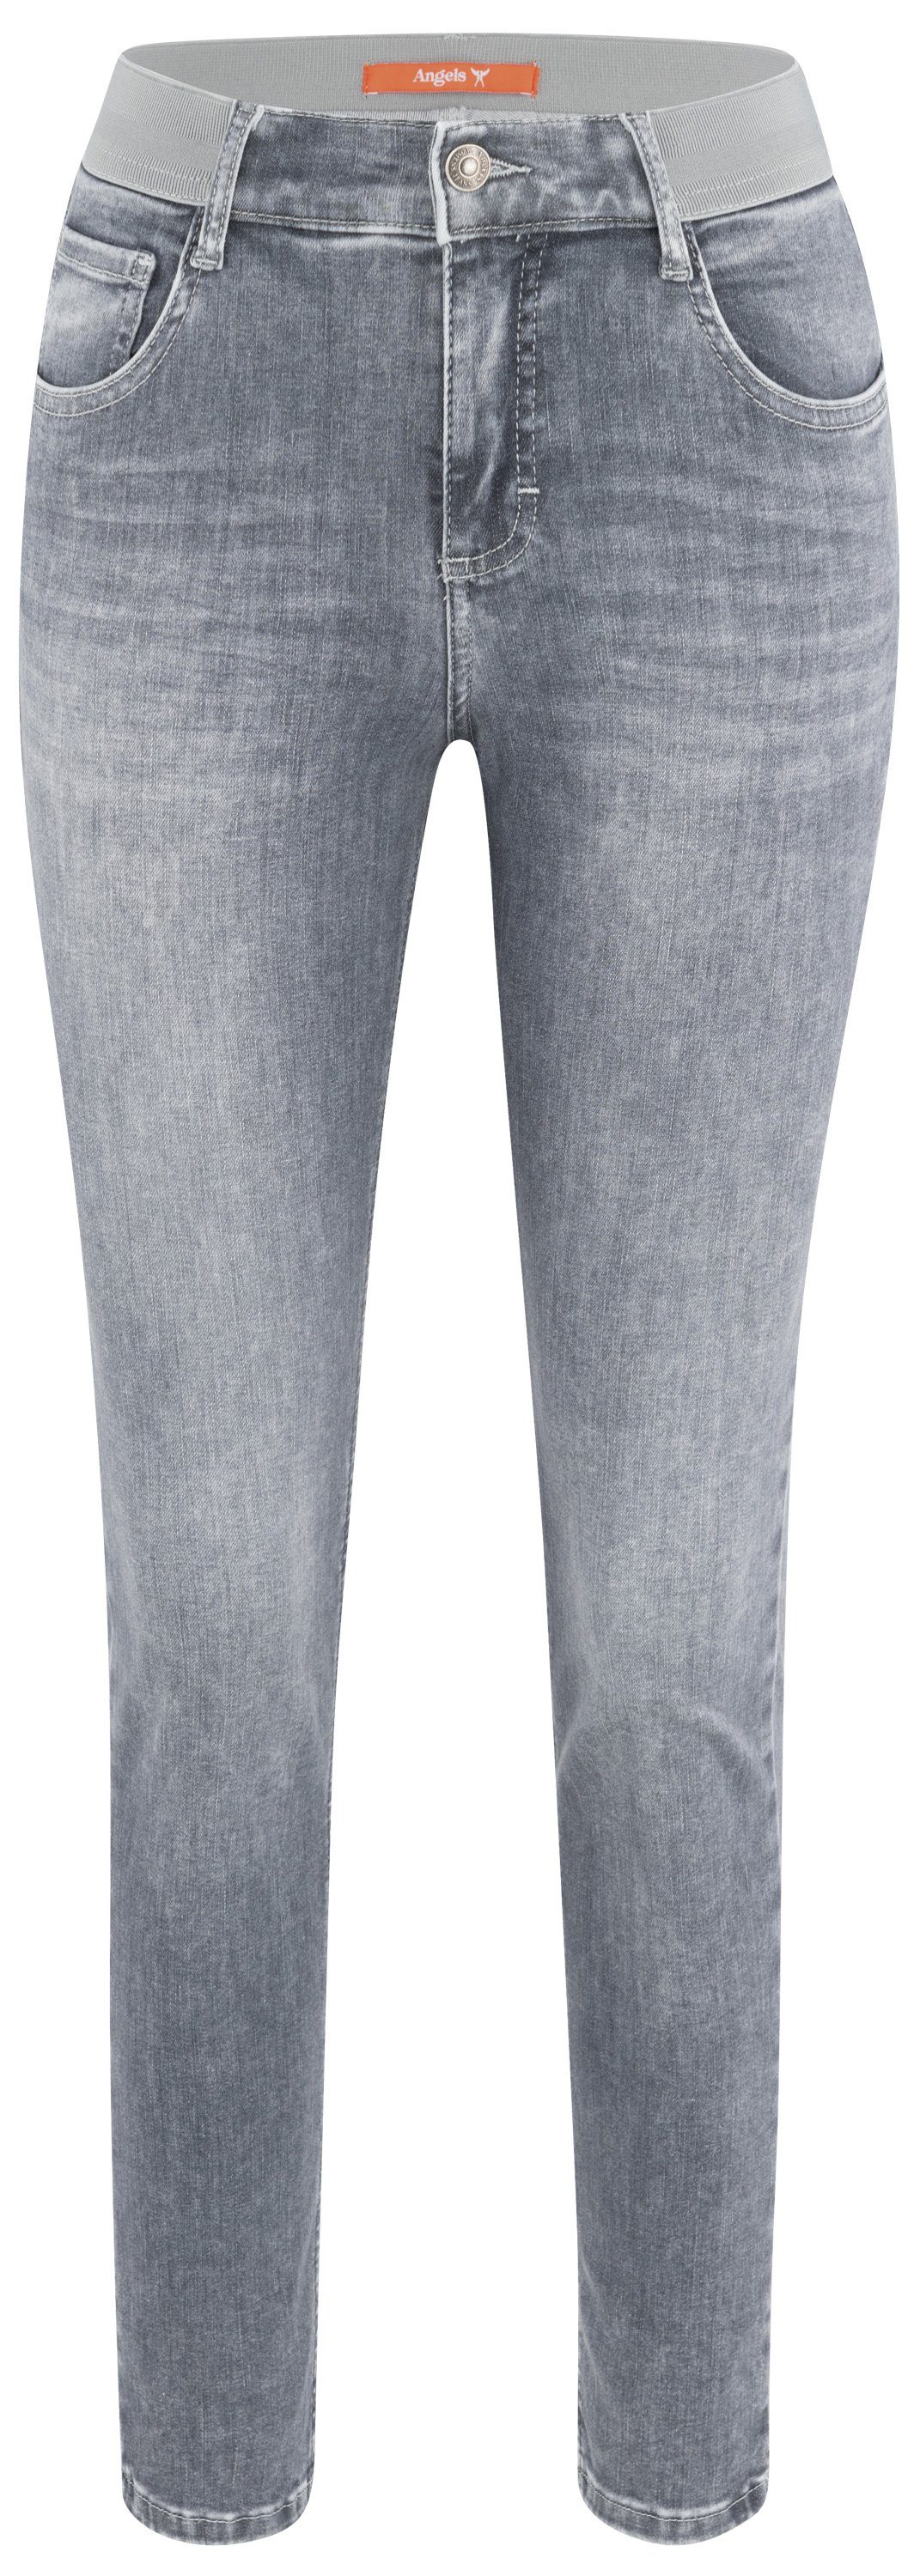 grey Stretch-Jeans ANGELS JEANS used 399 mid mid 1358 ANGELS SIZE 123730.1358 used ONE grey